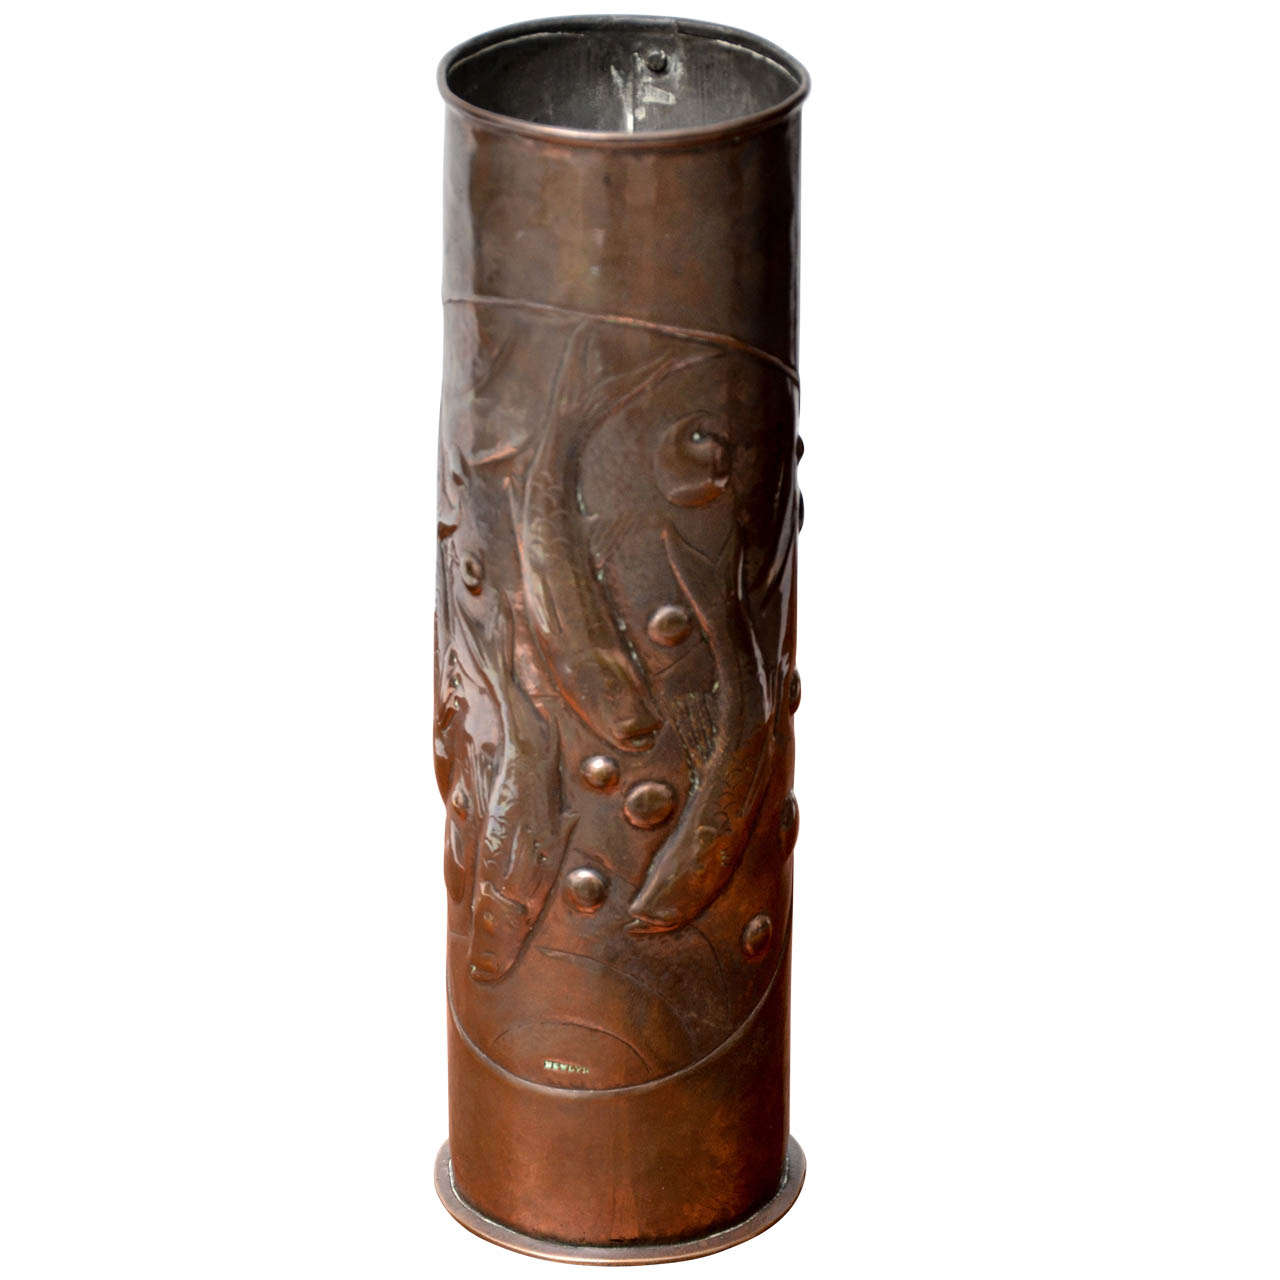 Newlyn Repouse Copper Vase with Fish Motif ca. 1900